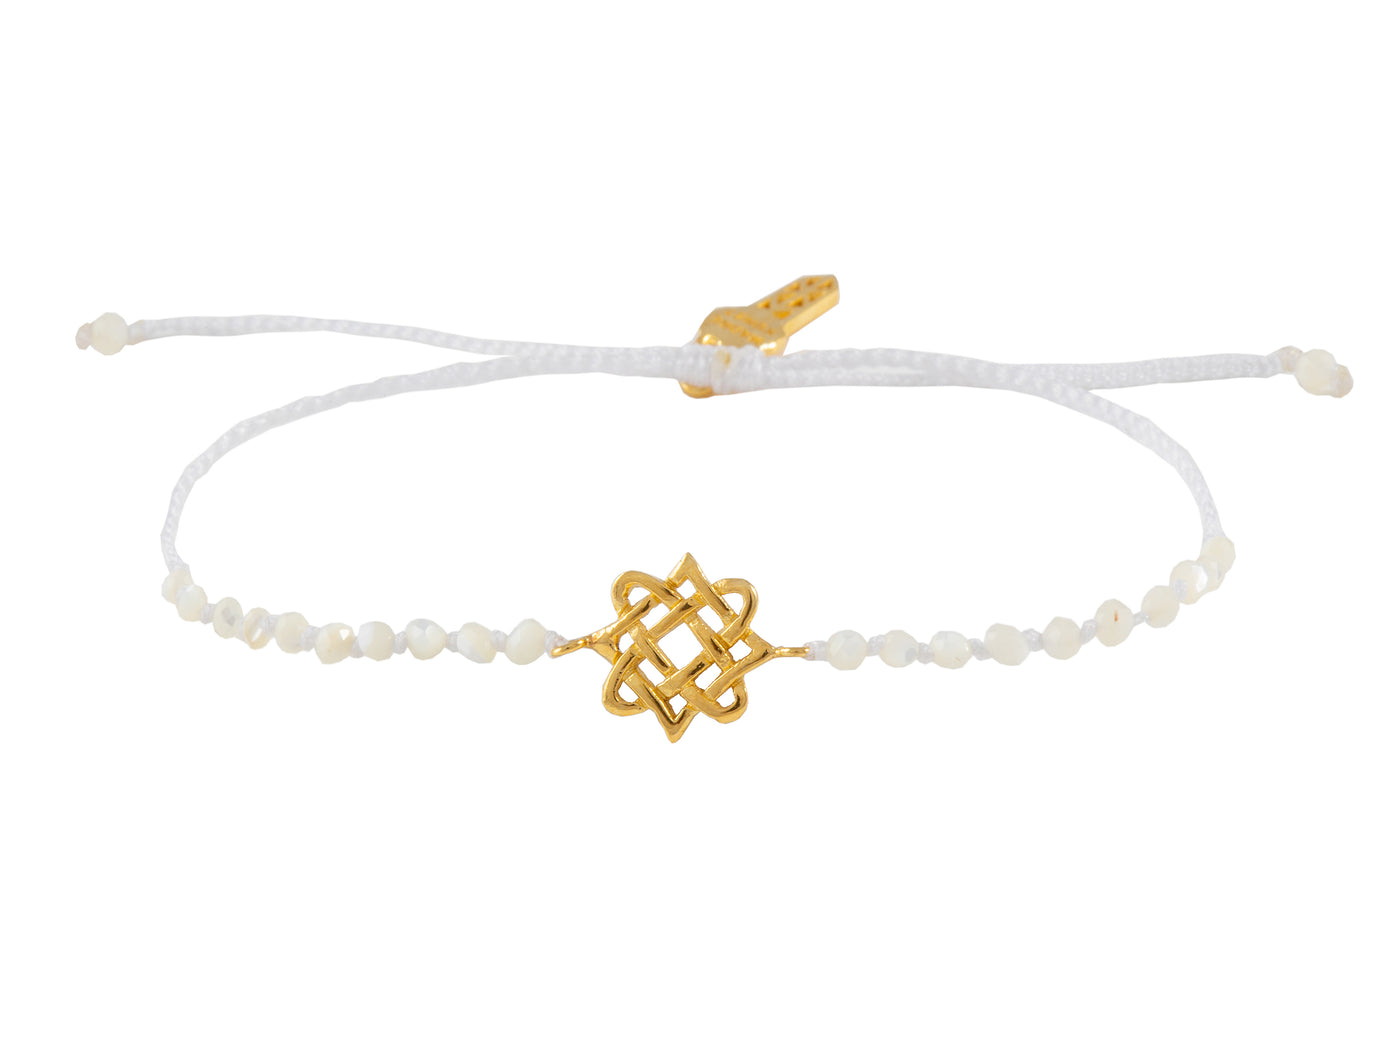 Lada star talisman mini bracelet with beads. Silver, gold plated